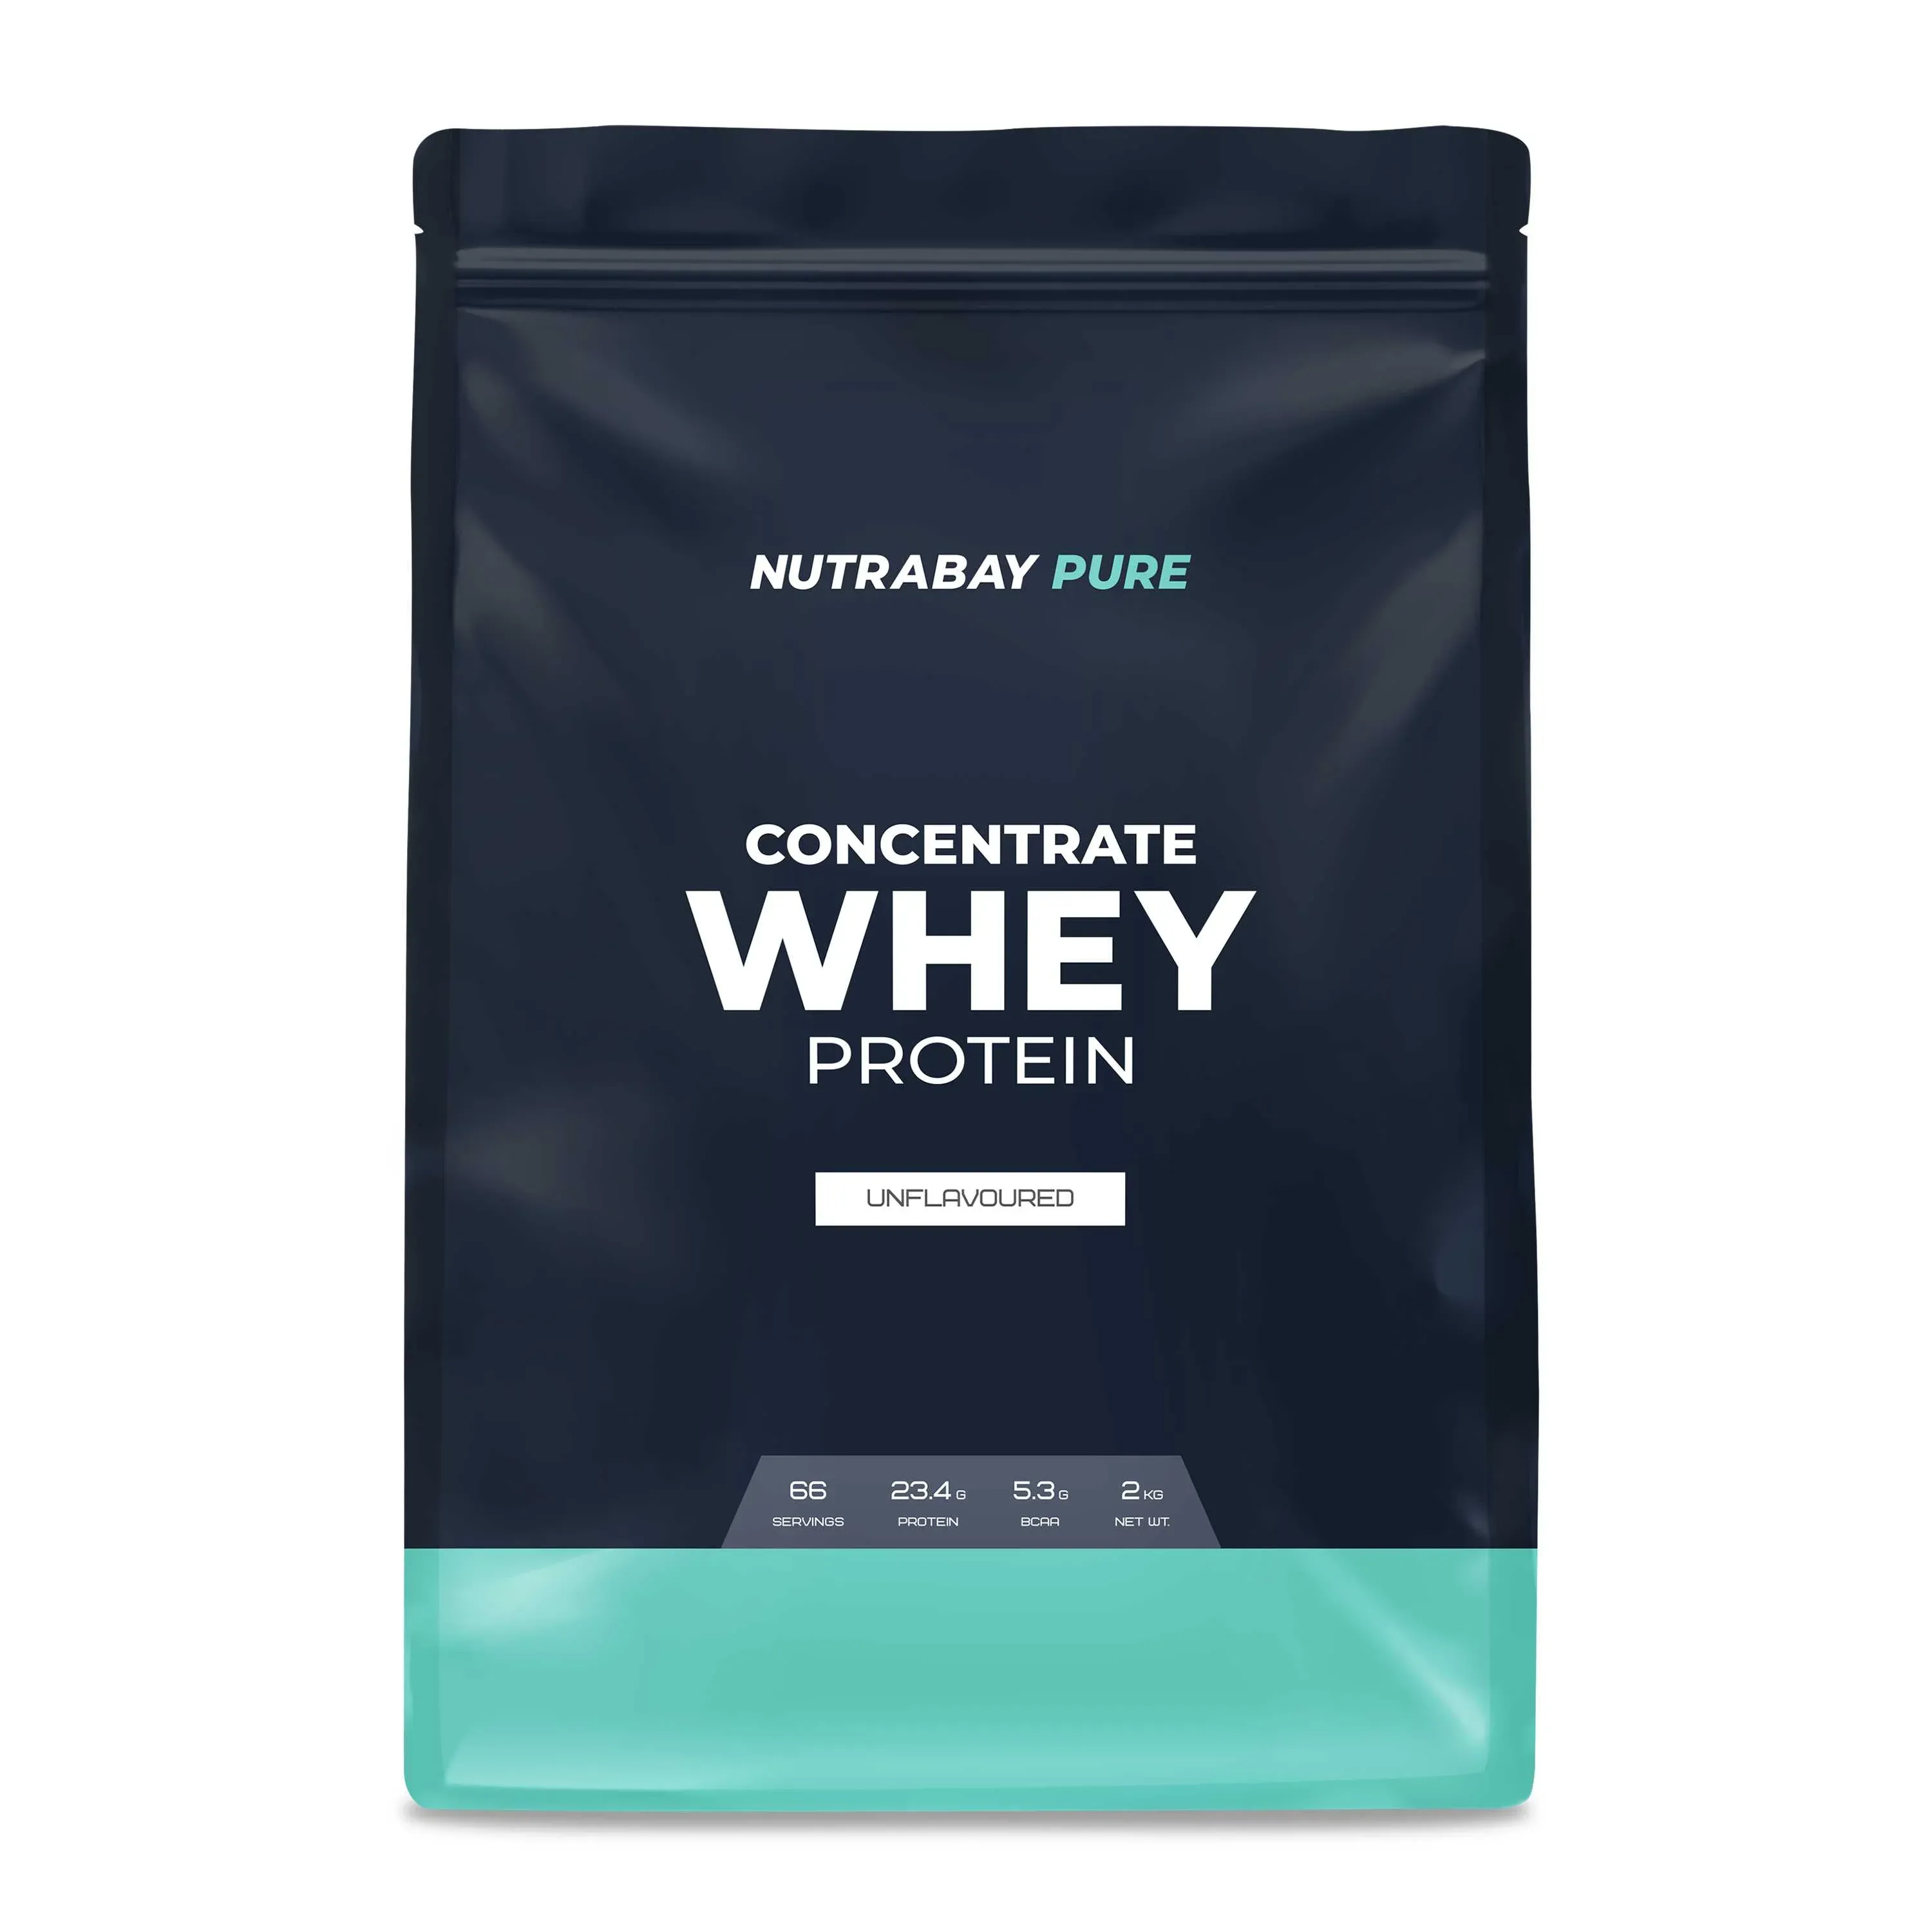 Nutrabay Pure Whey Protein Concentrate Image